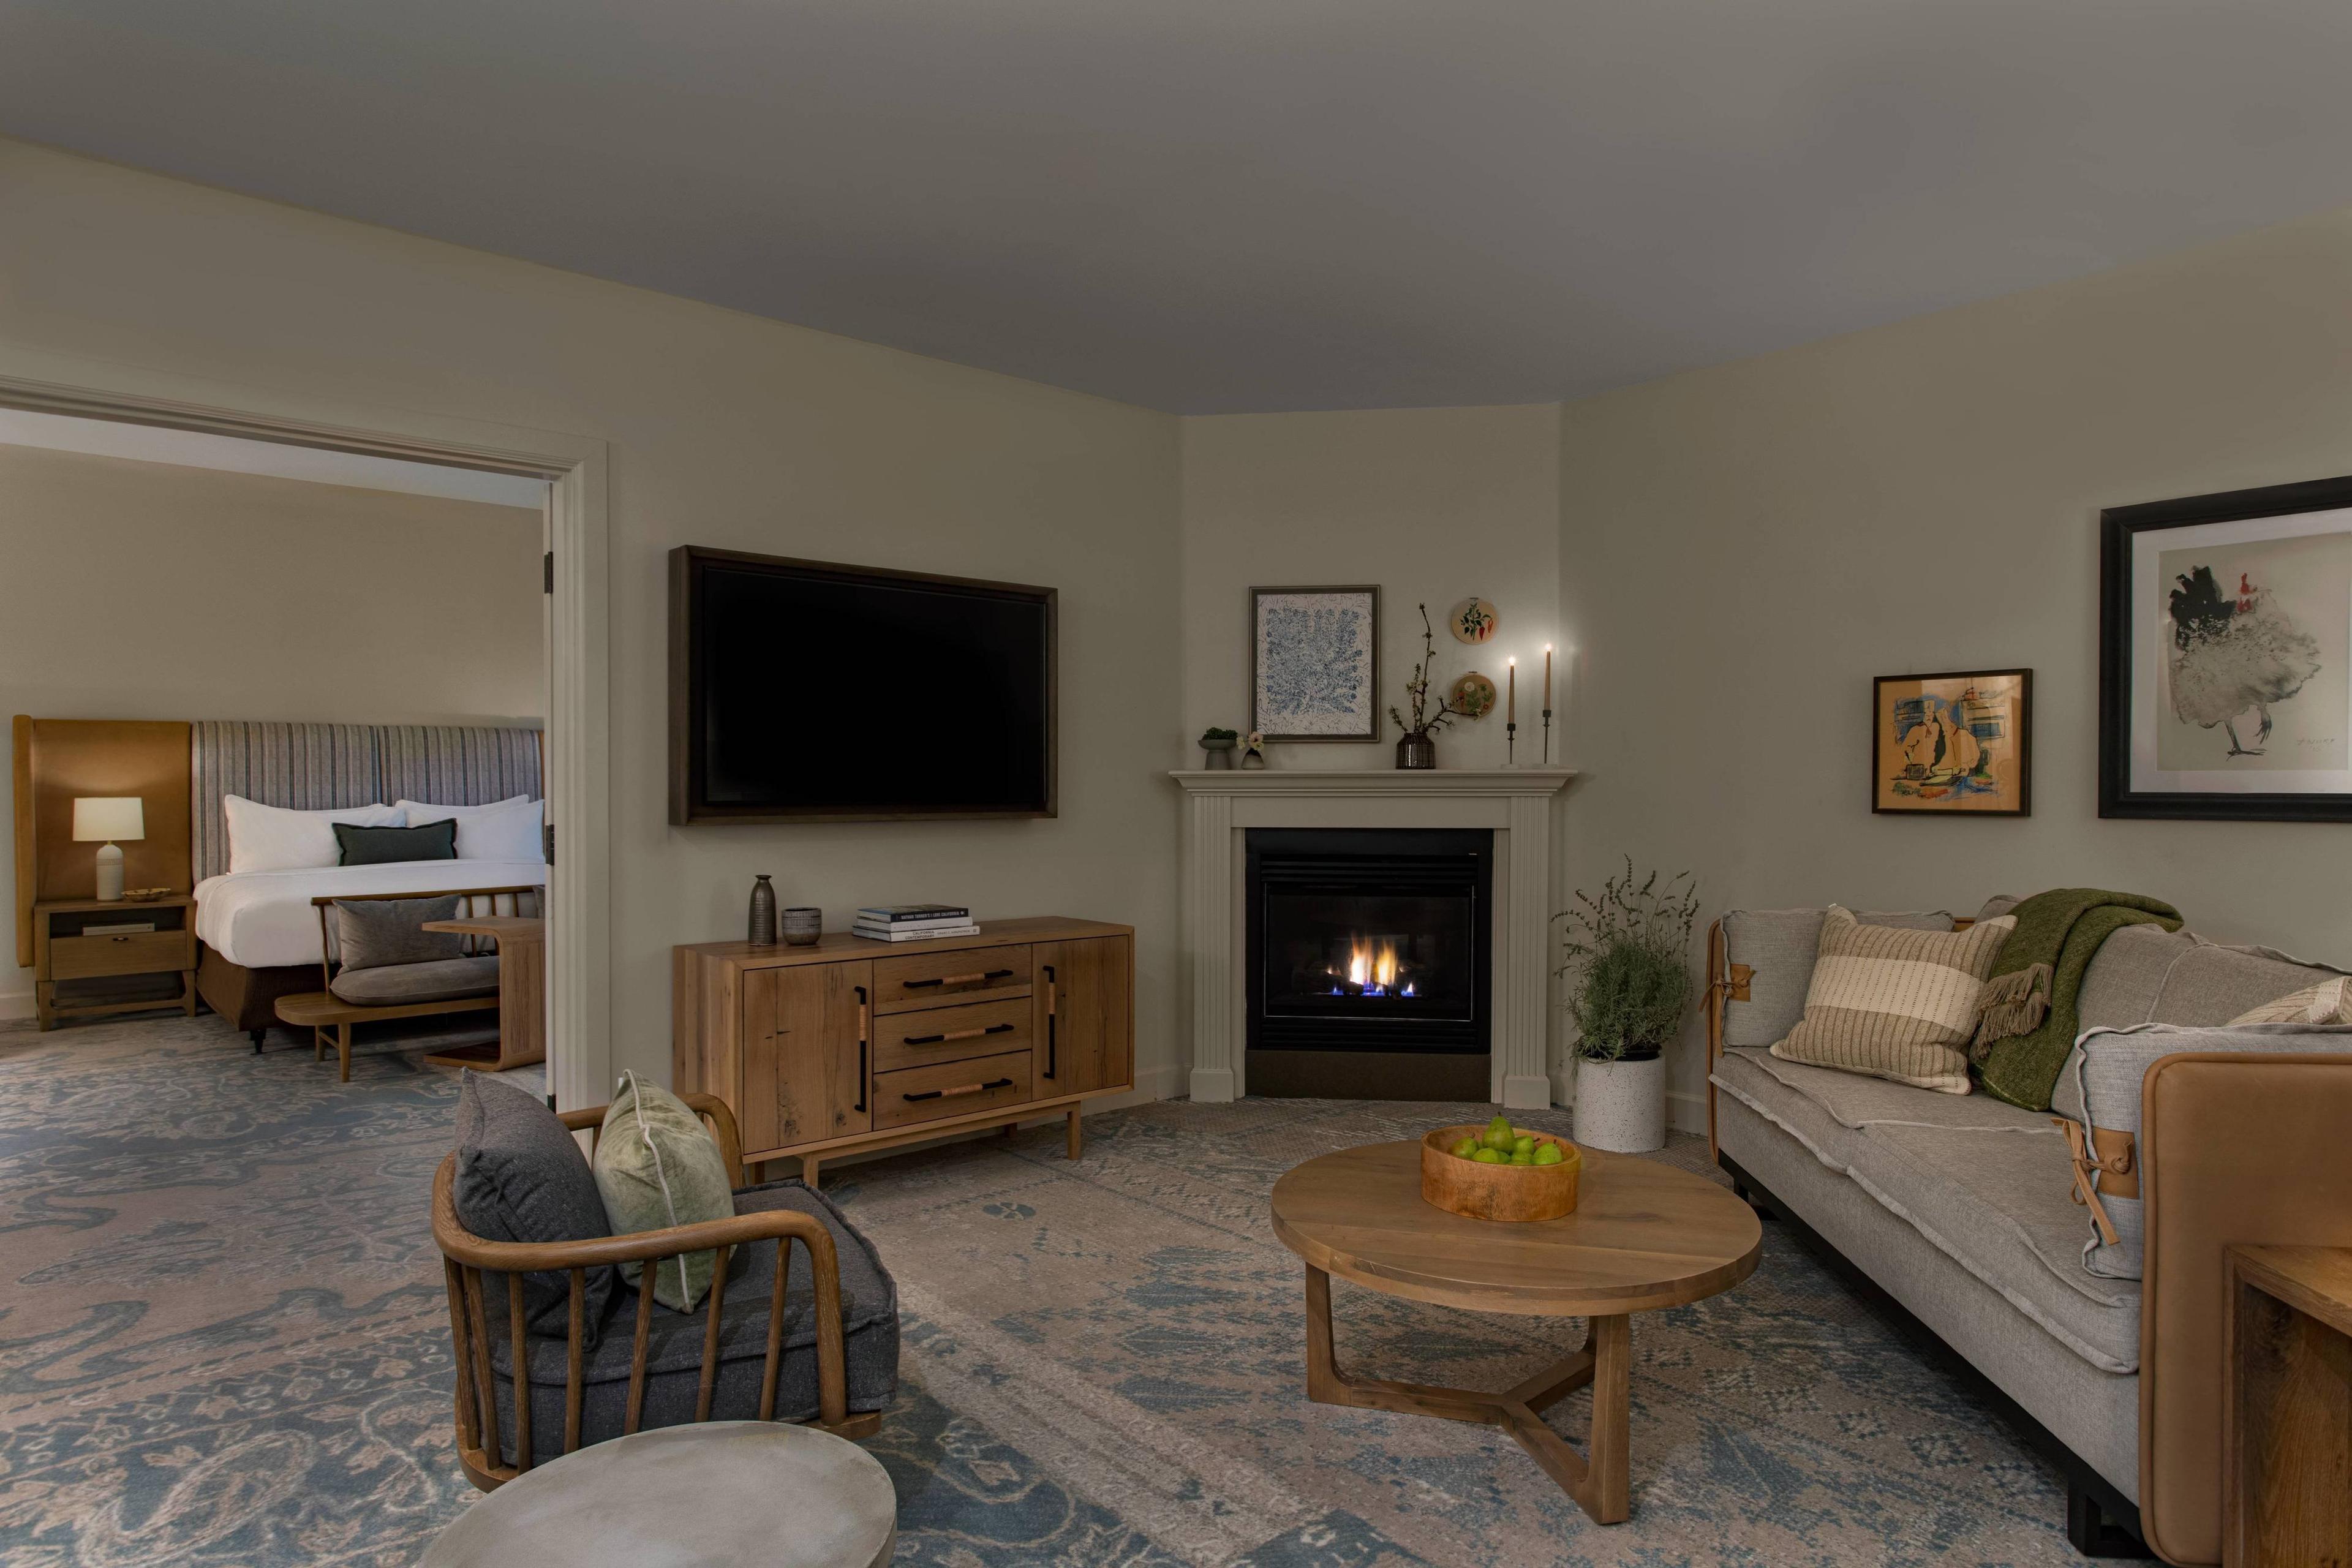 Located in the main building, our lodge premier suites feature an elegant, expansive bedroom and a stylish living room with a fireplace, wet bar, and sofa bed.